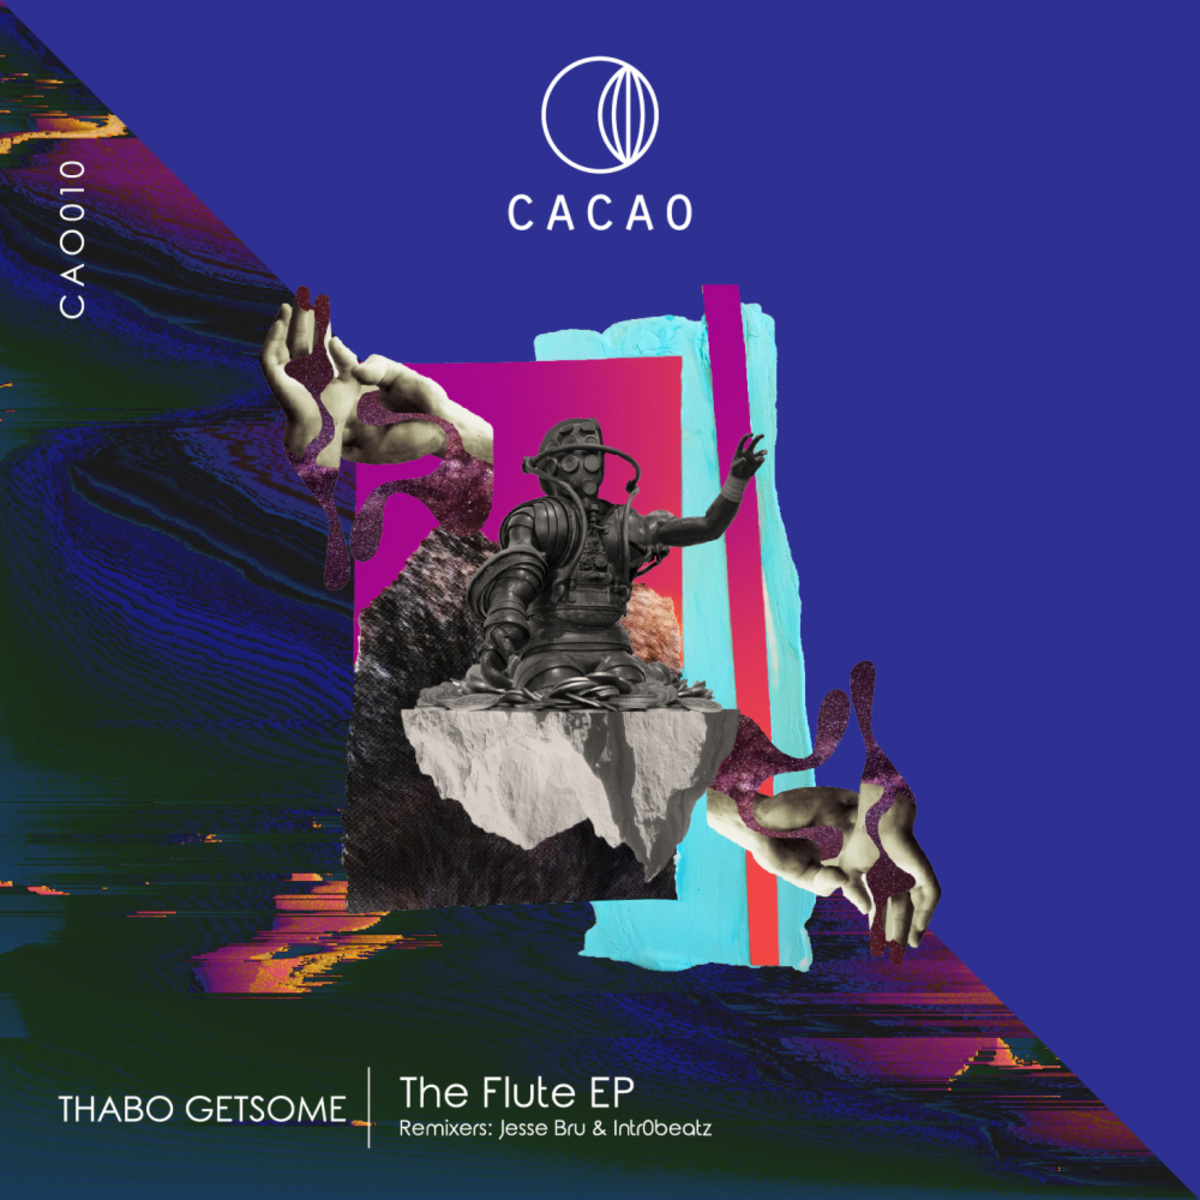 Thabo Getsome - The Flute / Cacao Records